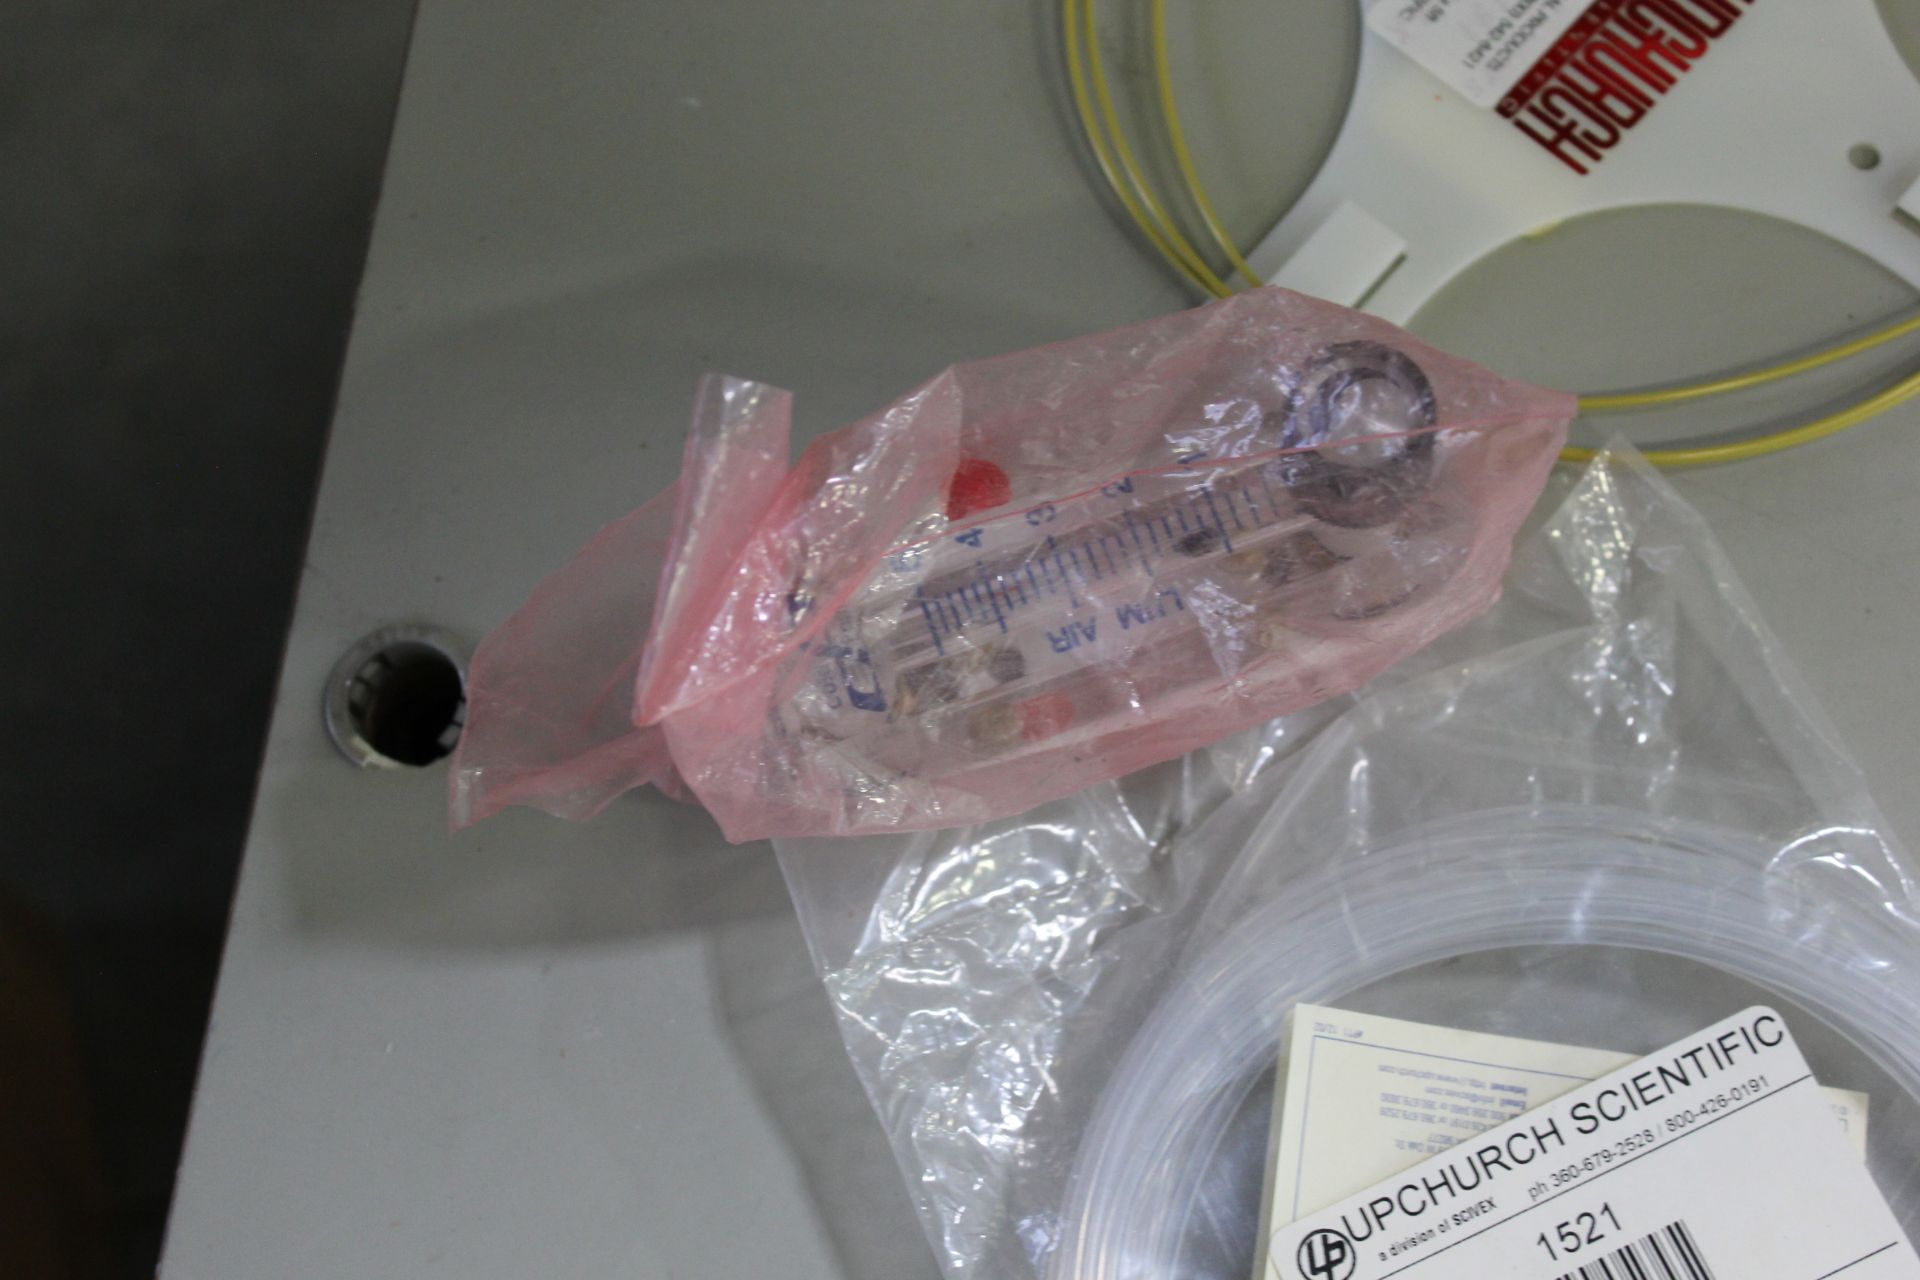 LOT OF HPLC PARTS - FITTINGS, TUBING, ETC - Image 10 of 13